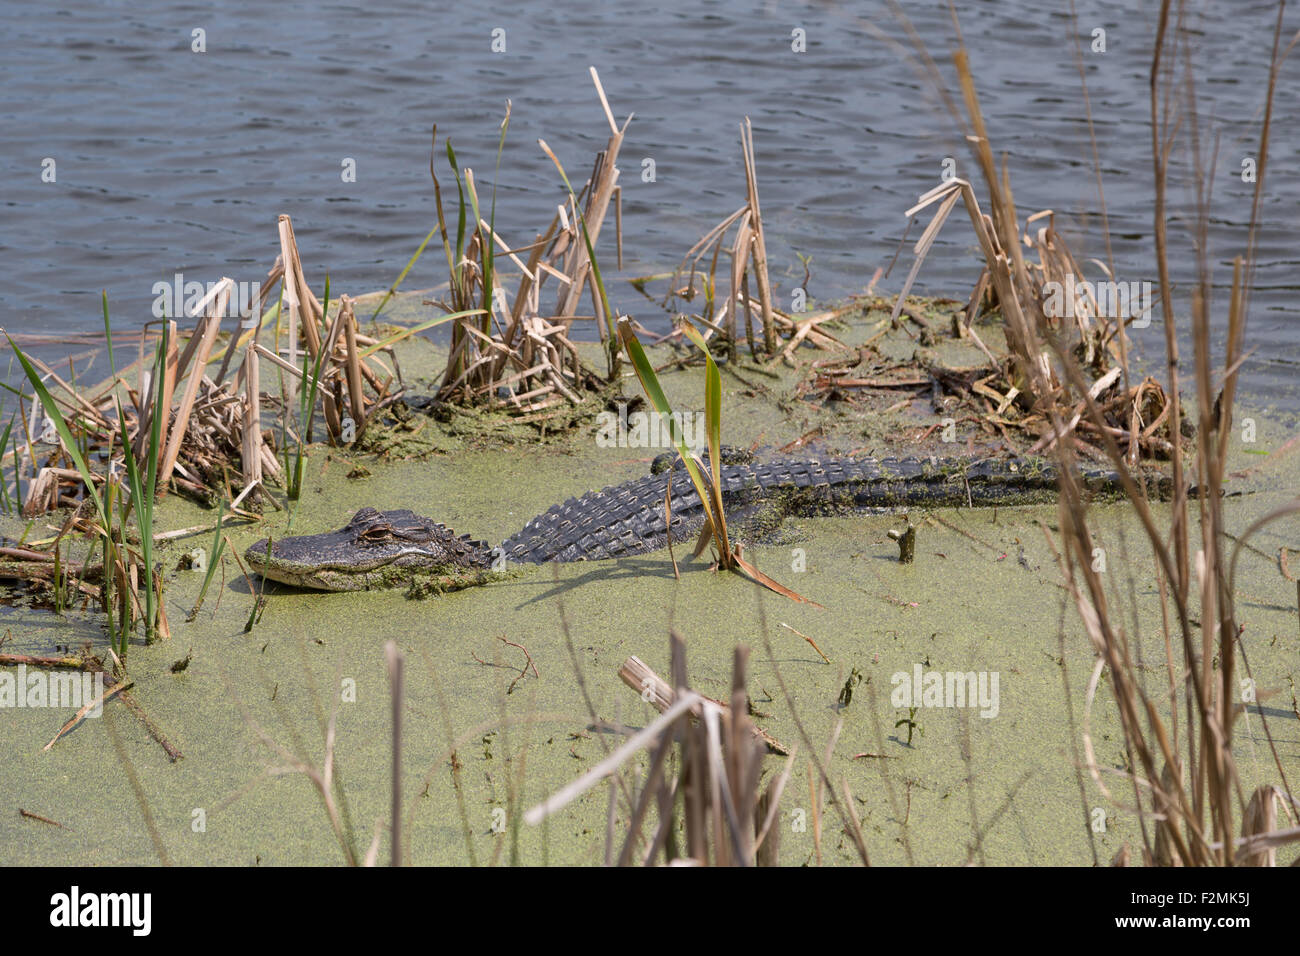 A photograph of an American alligator in the wild near Savannah in Georgia. The alligator is hiding amongst some algae. Stock Photo